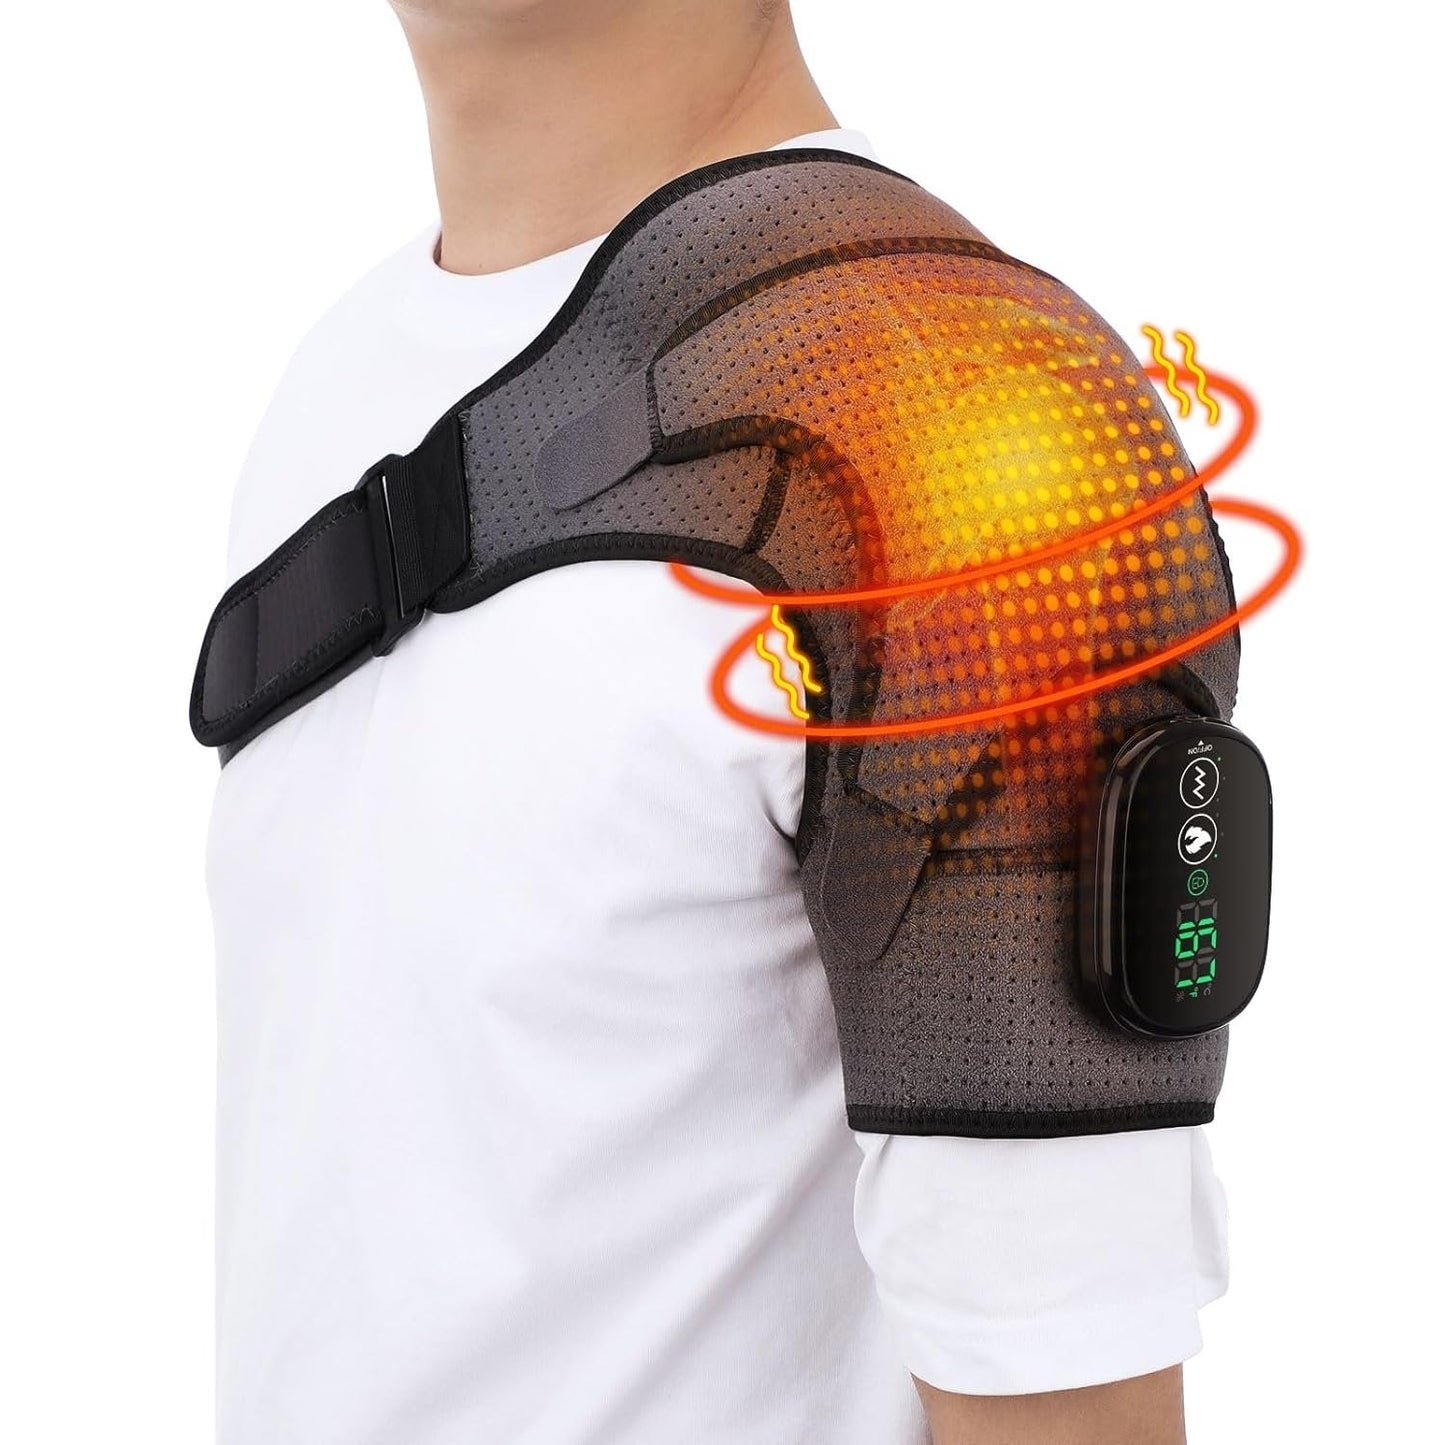 Heated Shoulder Wrap with Vibration - Cordless Shoulder Heating Pad for Men and Women